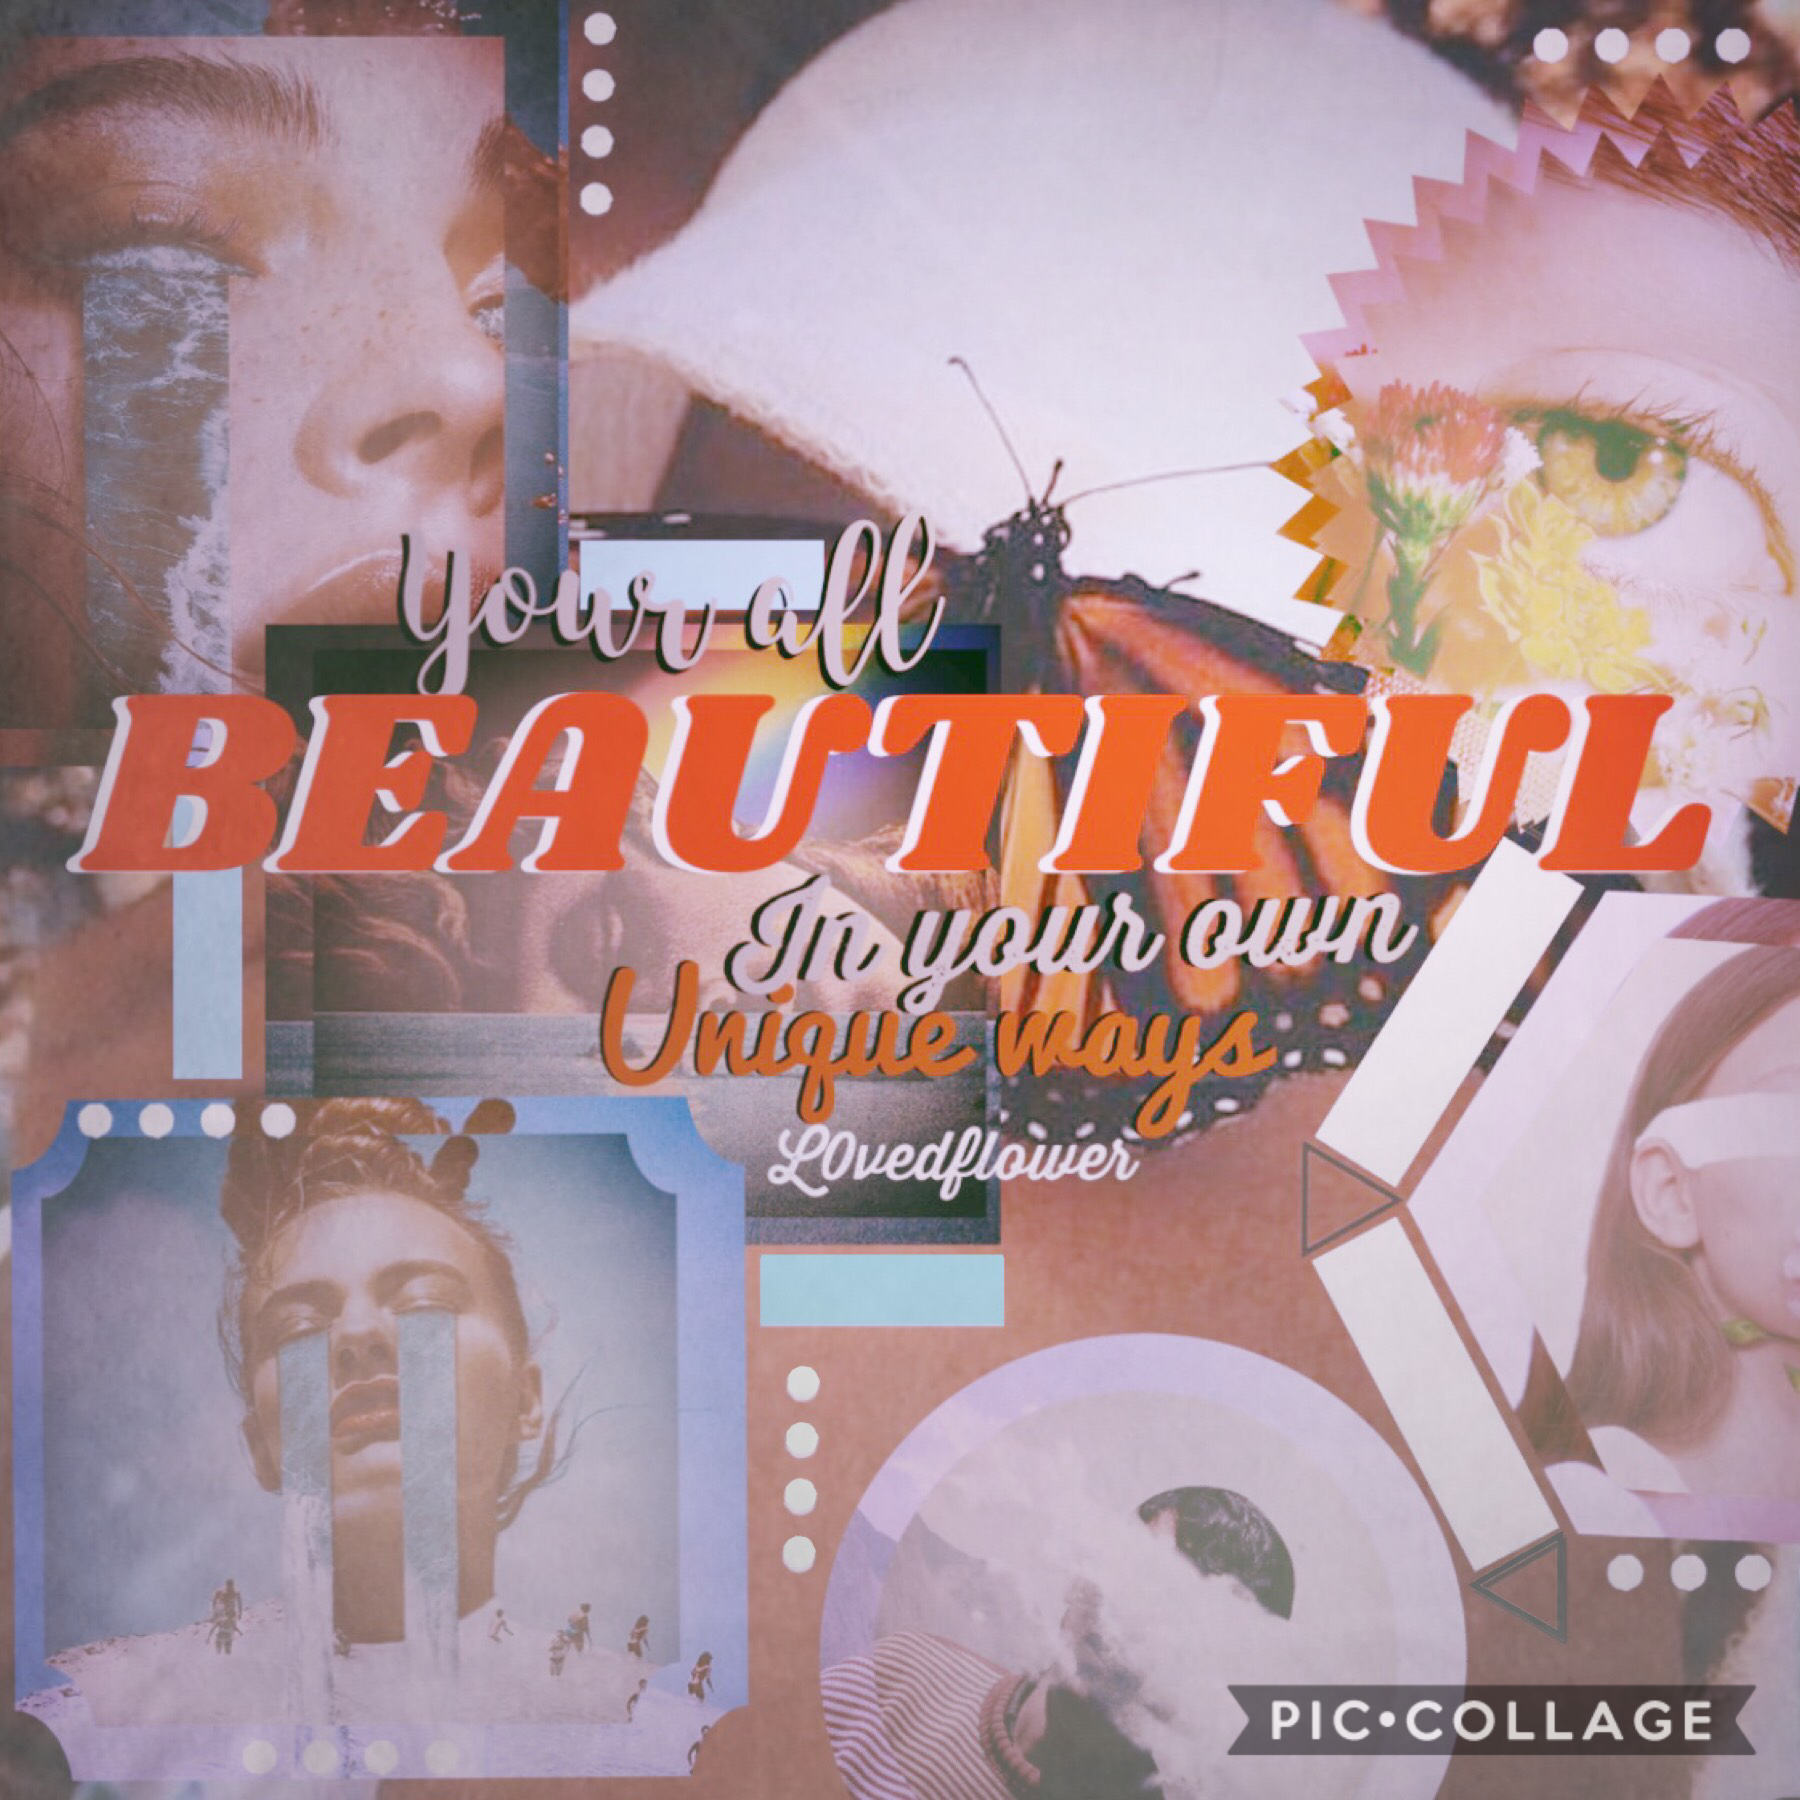 [click]
Just thought, my followers, friends and everyone should know that they are beautiful and amazing in their own ways. I made this. Hope you likeeee it:👊🏻✨💓seeeeyaaa x